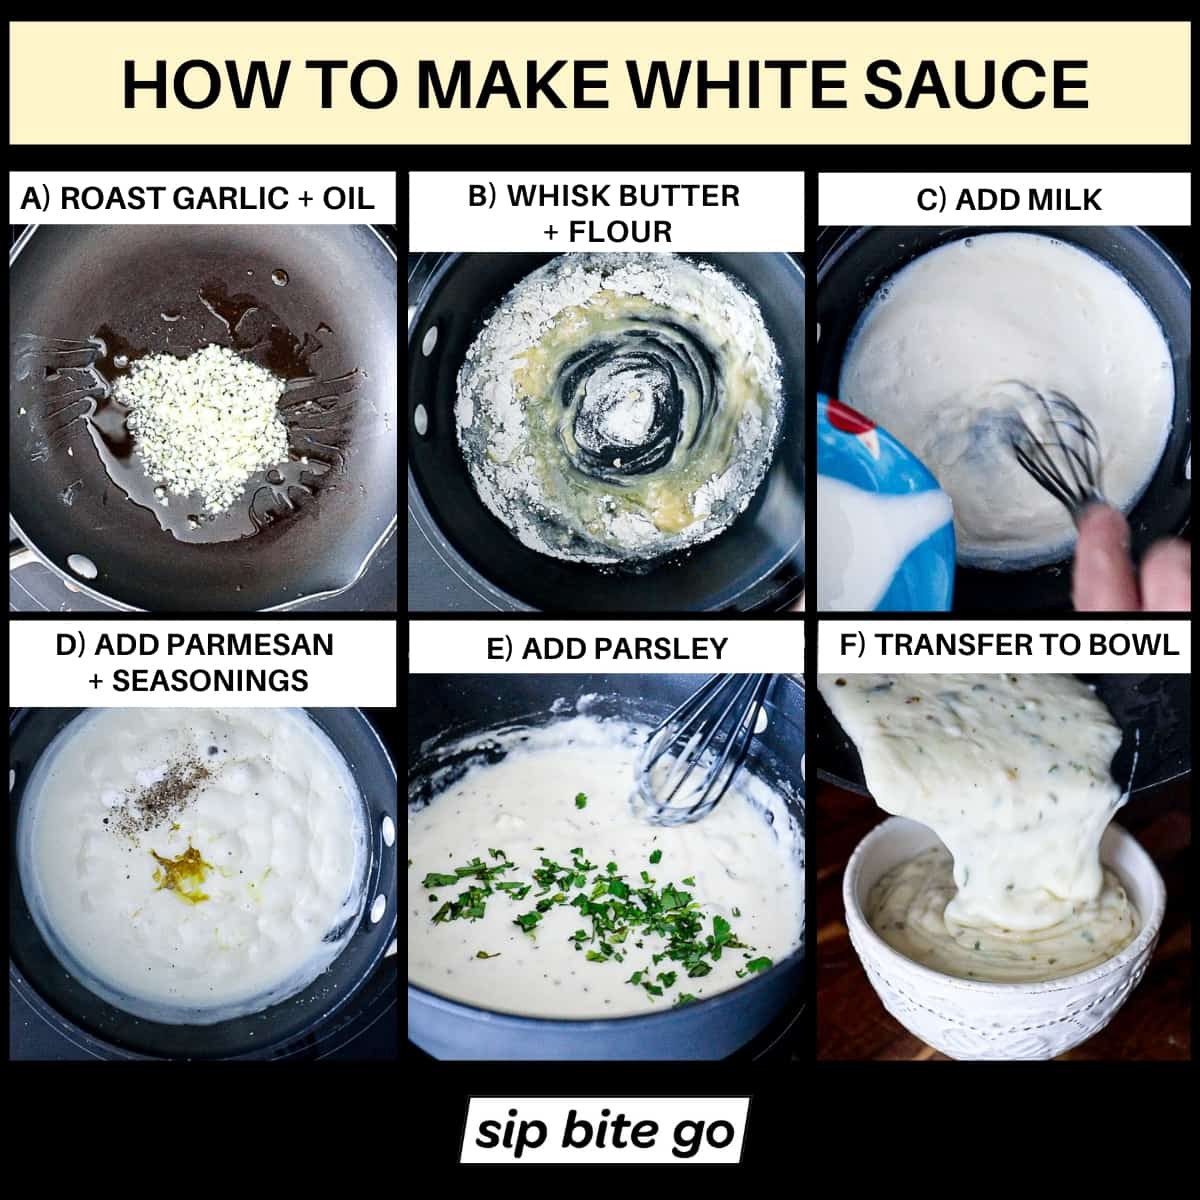 infographic chart demonstrating how to make white sauce for philly cheese steak pizza with step by step recipe directions.